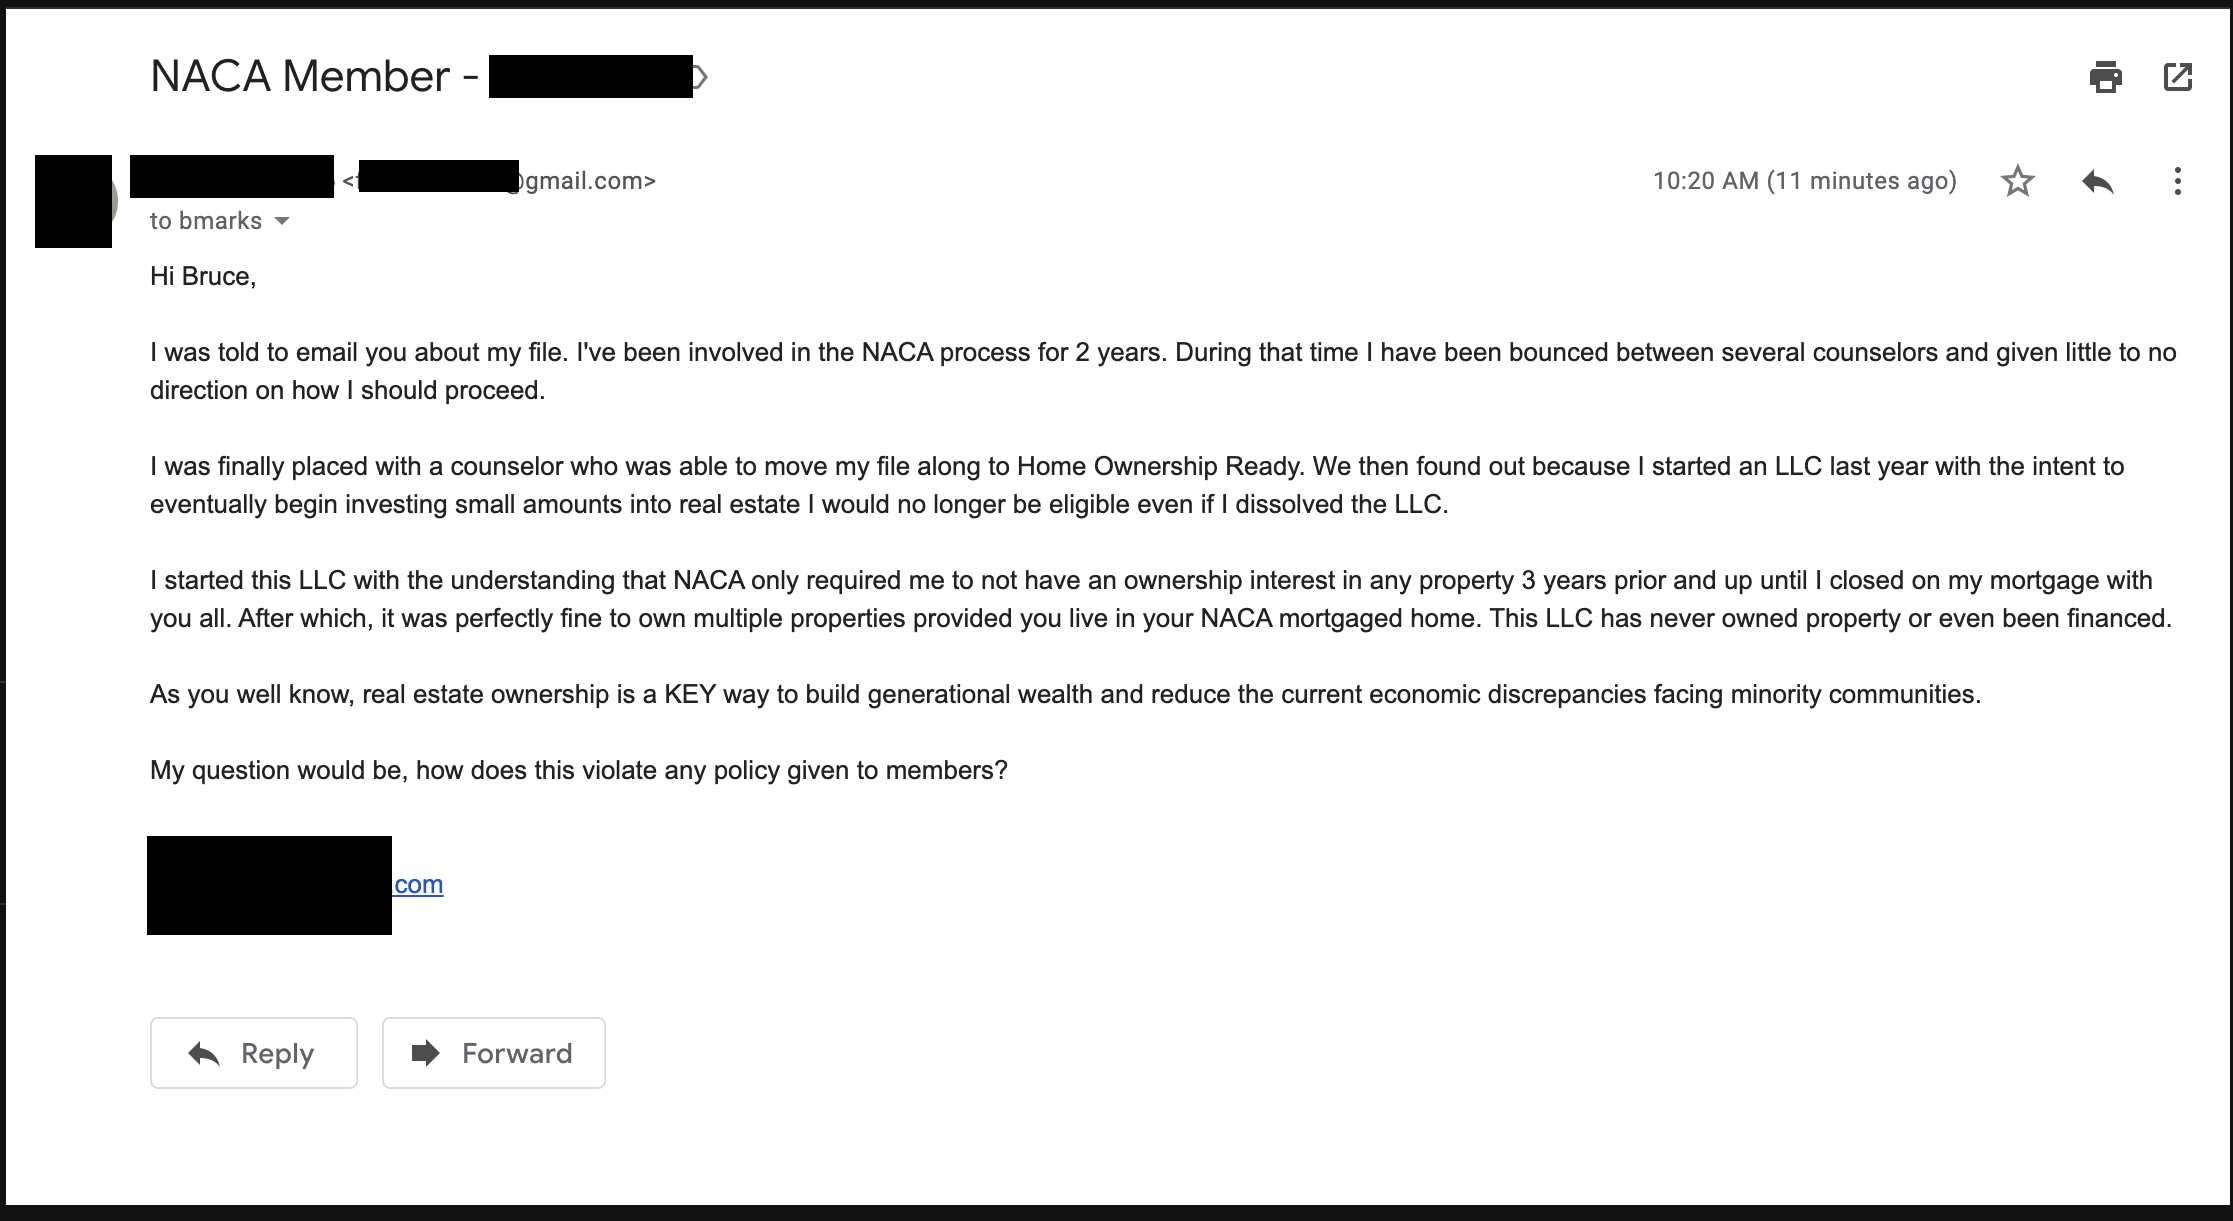 emailed CEO